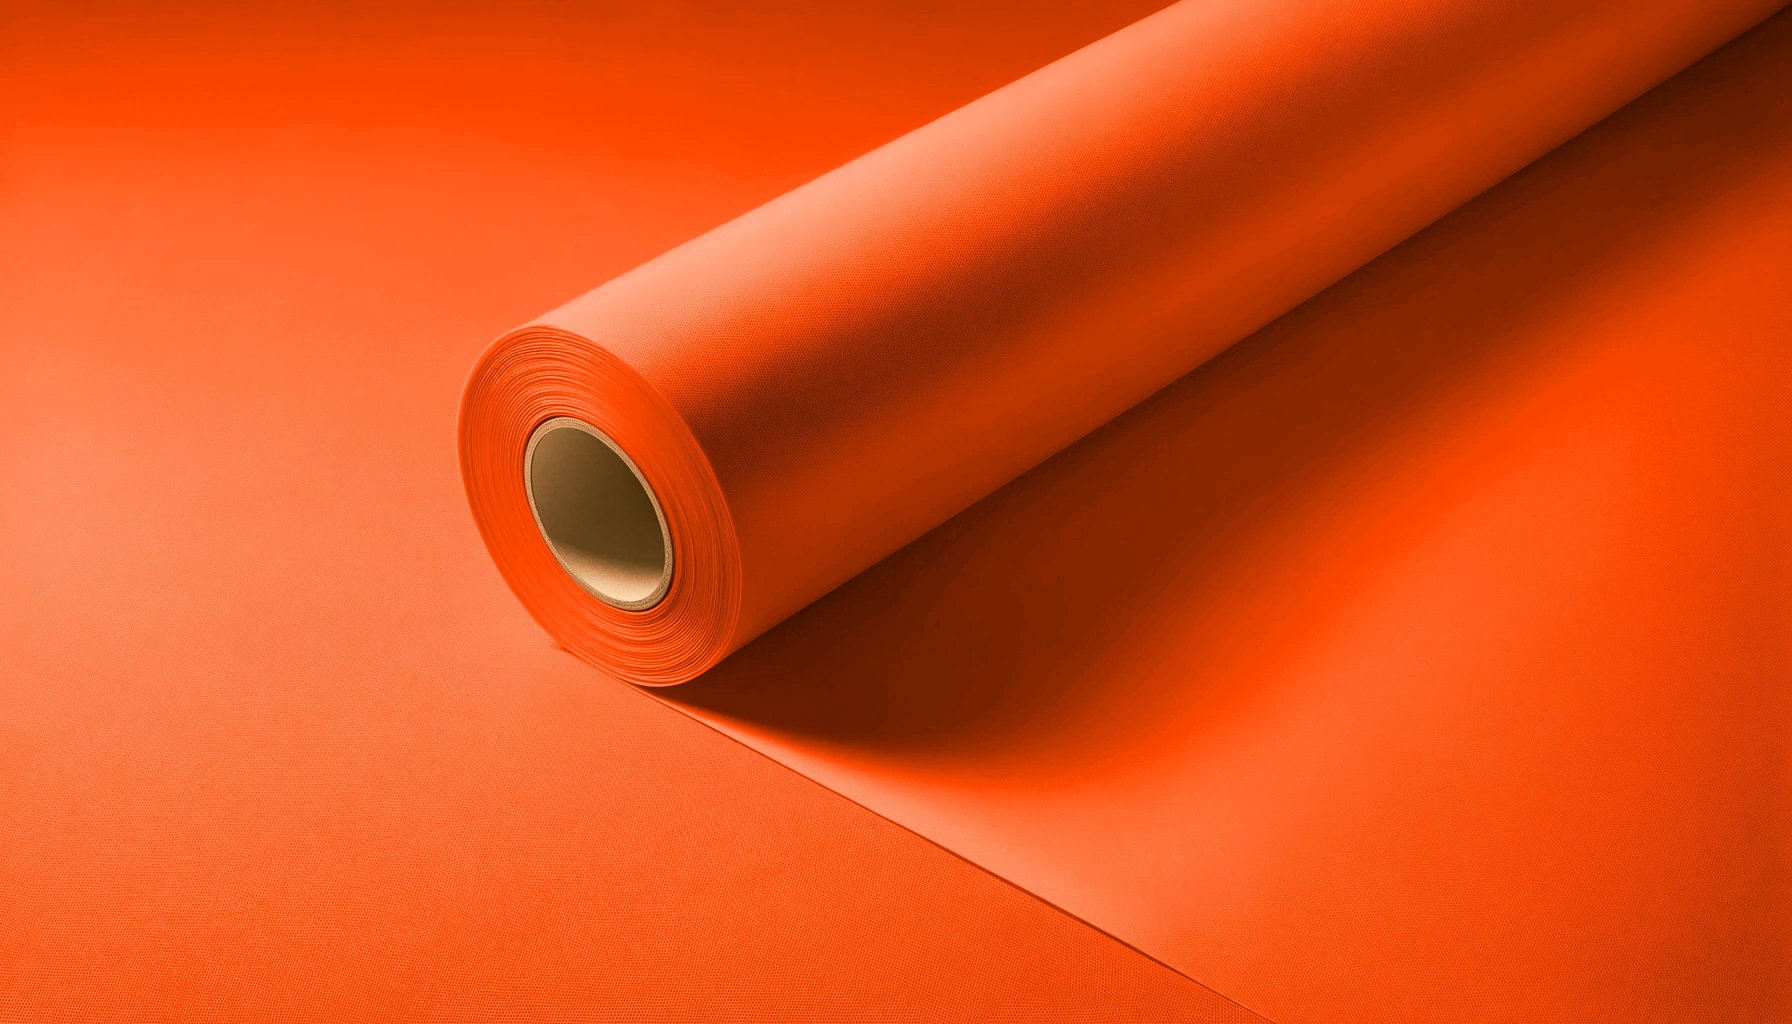 Peel & Stick Removable Re-usable Paint - Color RAL 2005 Luminous Orange - offRAL™ - RALRAW LLC, USA